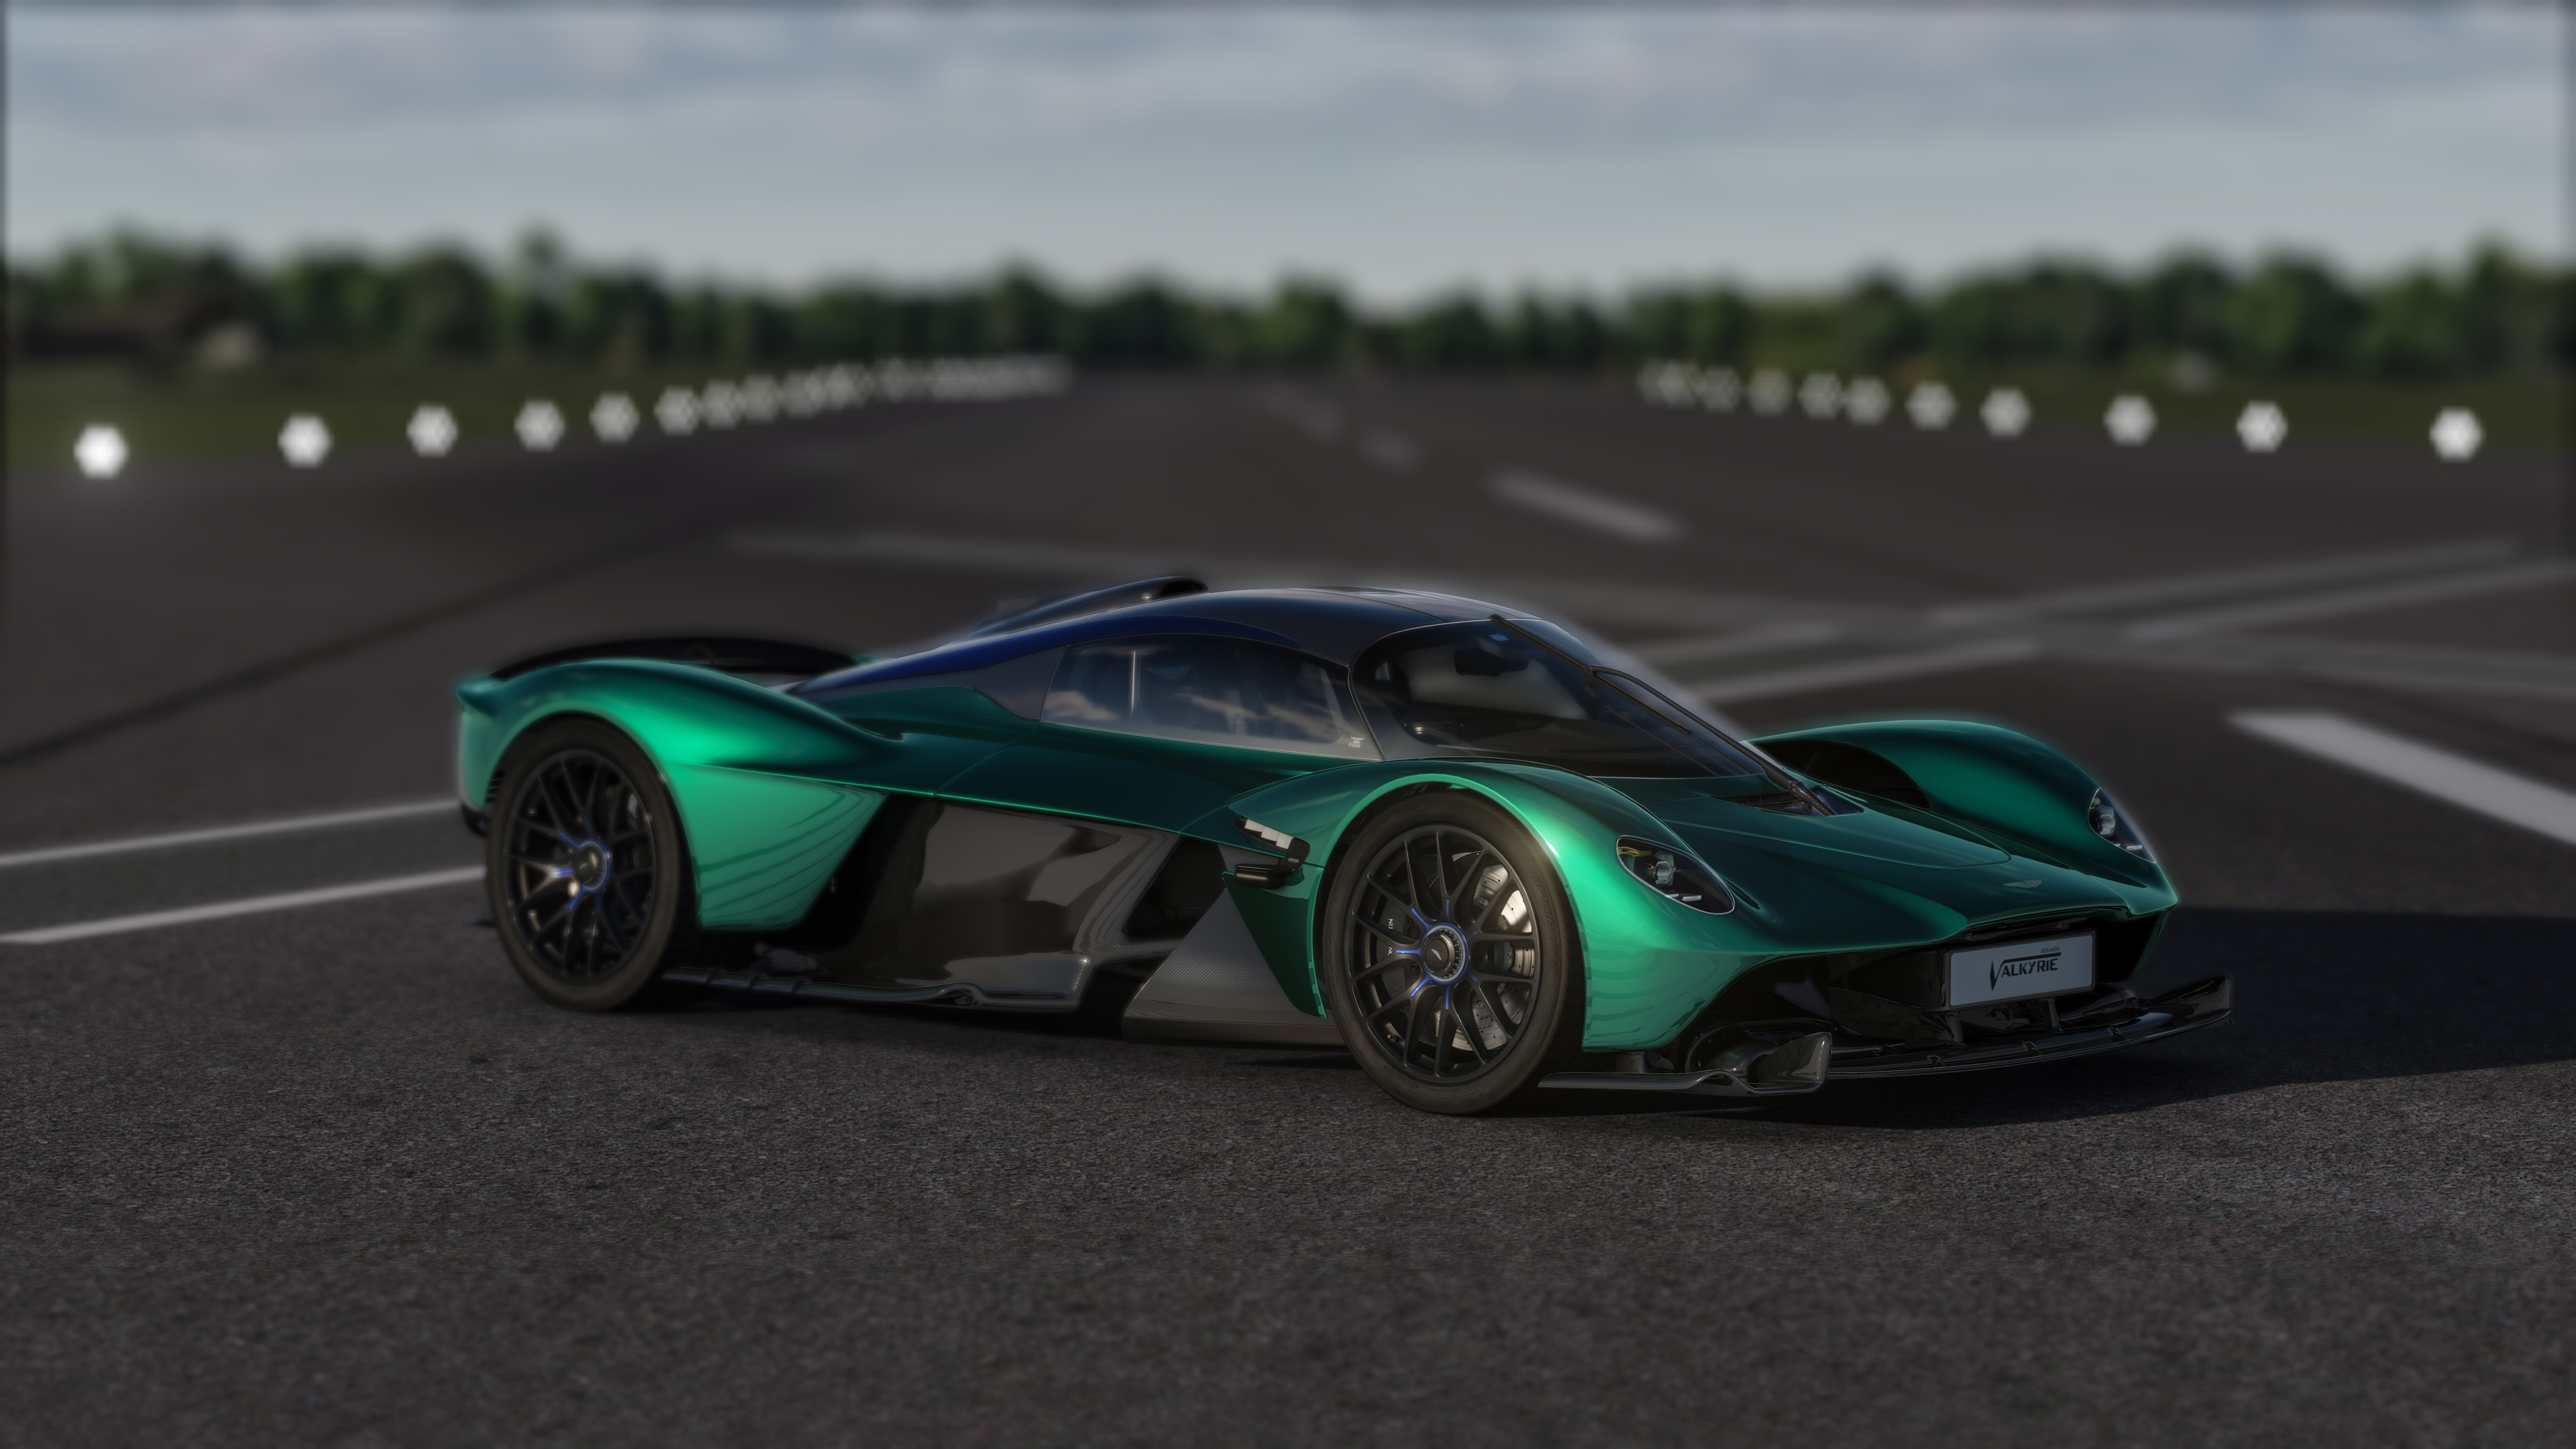 General 5760x3240 Assetto Corsa car PC gaming